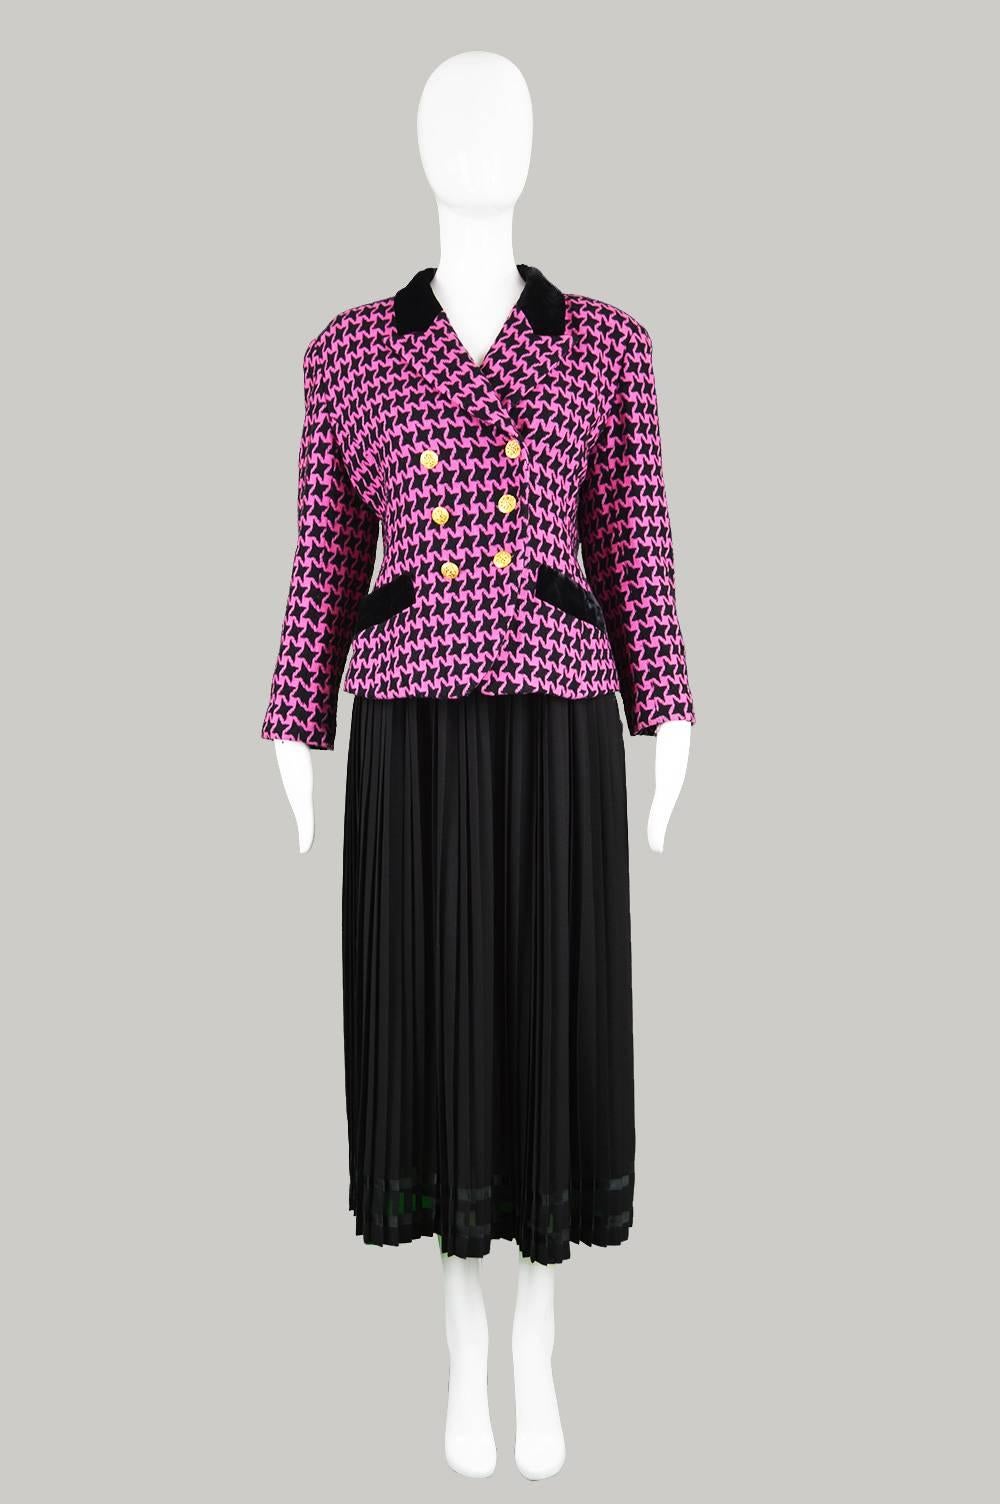 A classic and beautifully tailored vintage women's blazer/ jacket by luxury vintage designer, Charles Jourdan. With a bold pink and black patterning on a wool fabric with a velvet collar and trim to the pockets, and sophisticated gold-tone buttons.